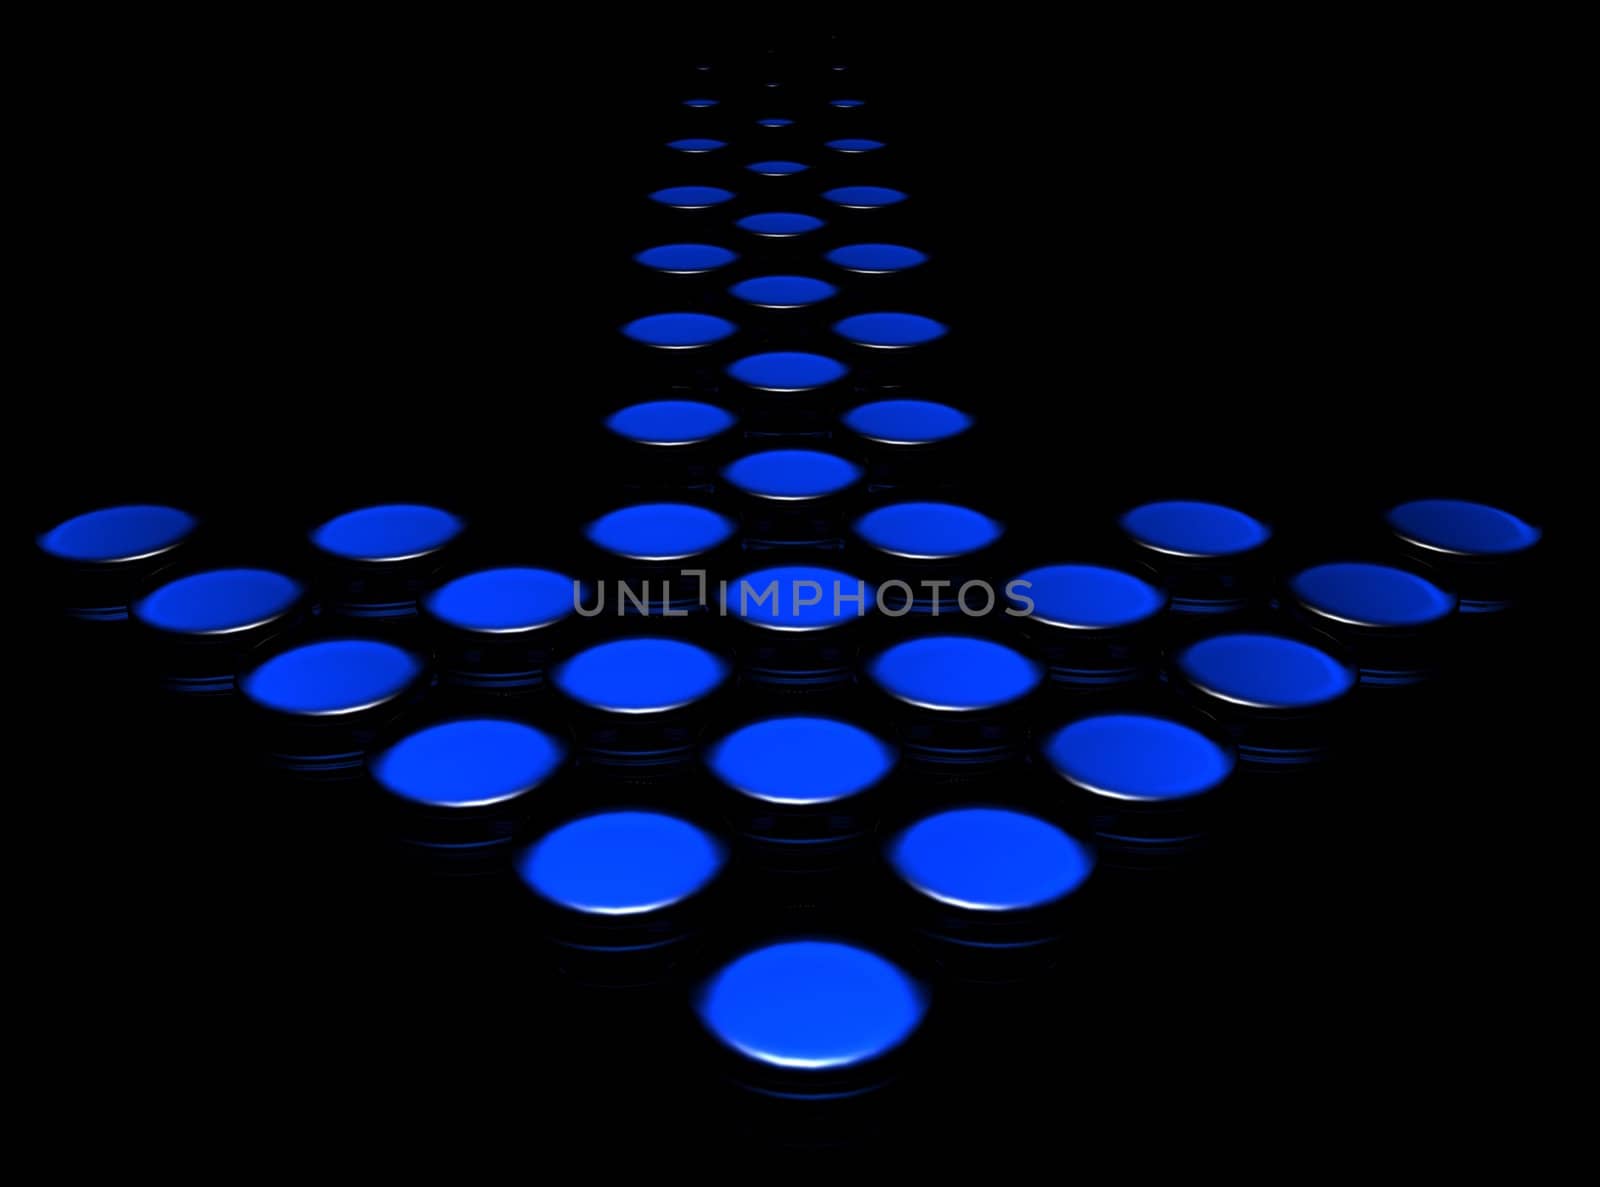 A blue arrow consisting of disc shaped tiles.